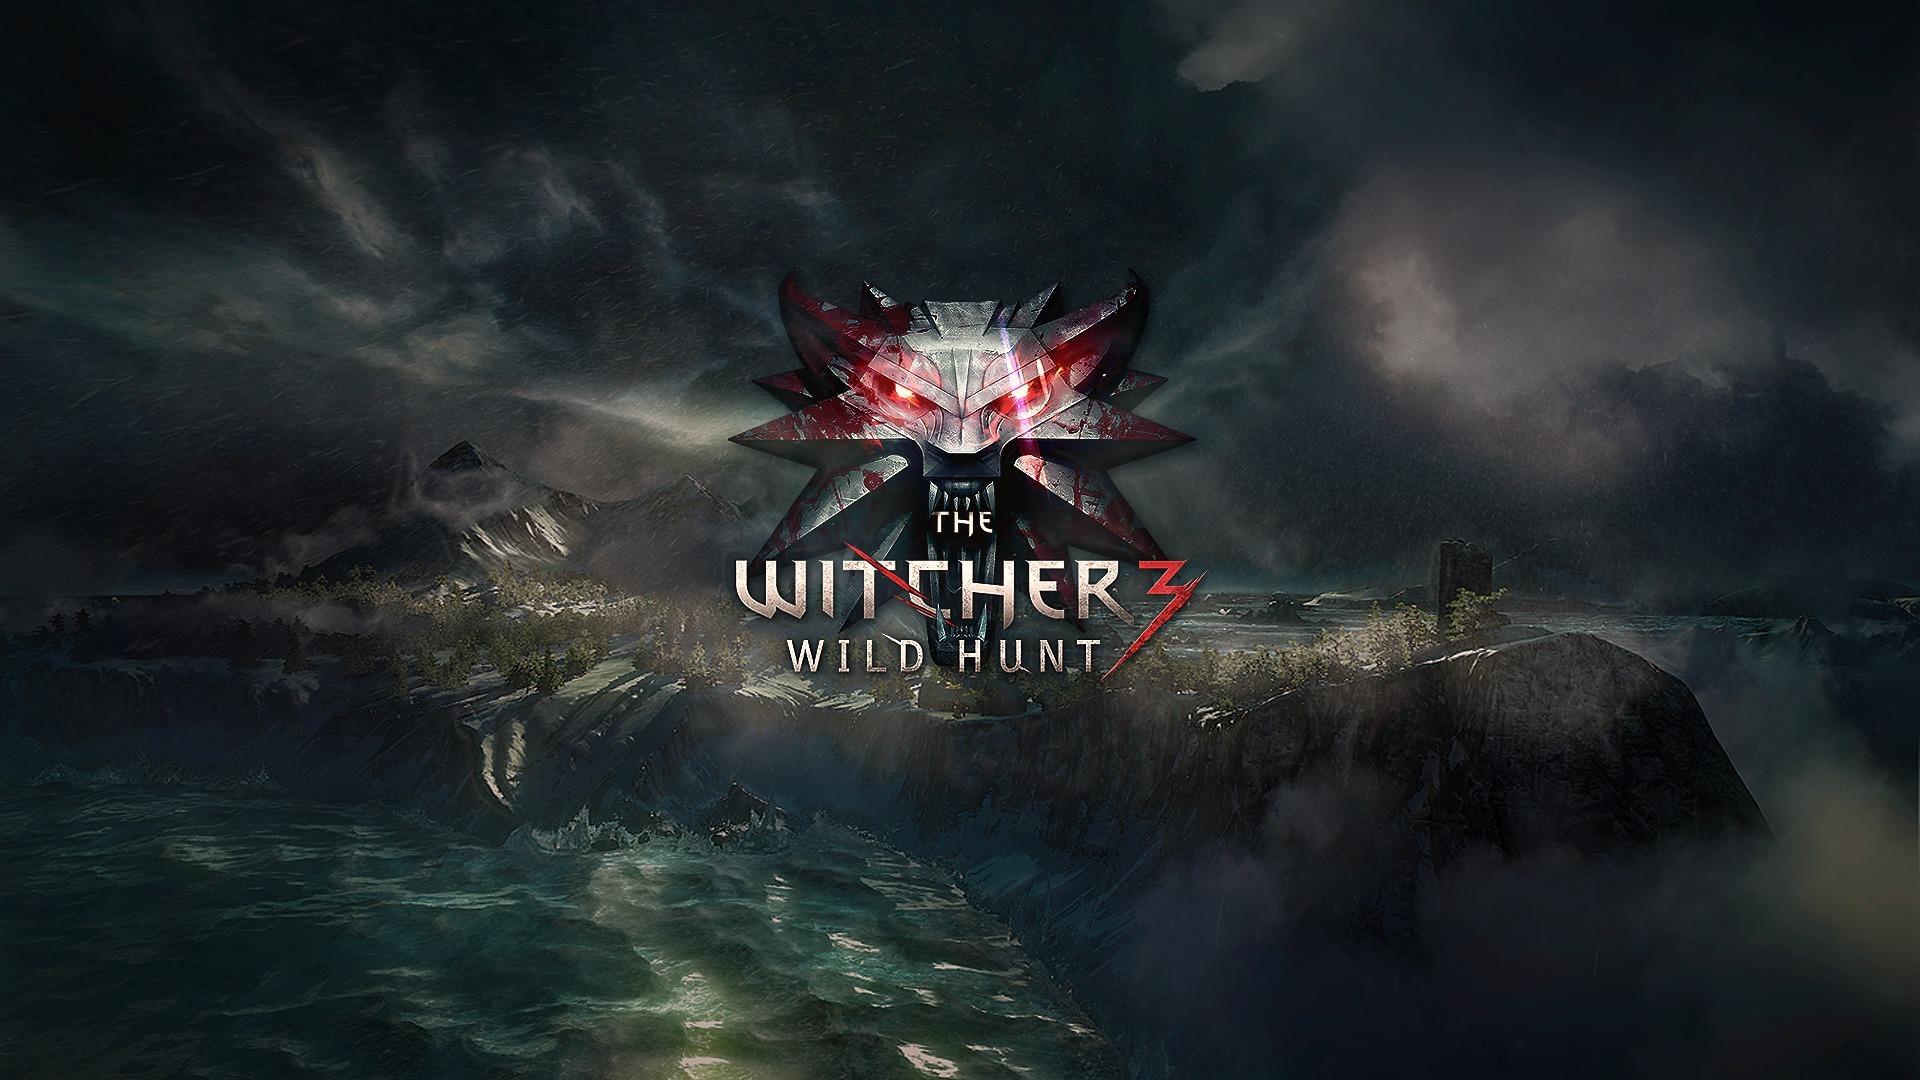 Image The Witcher The Witcher 3: Wild Hunt Rain Games 1920x1080